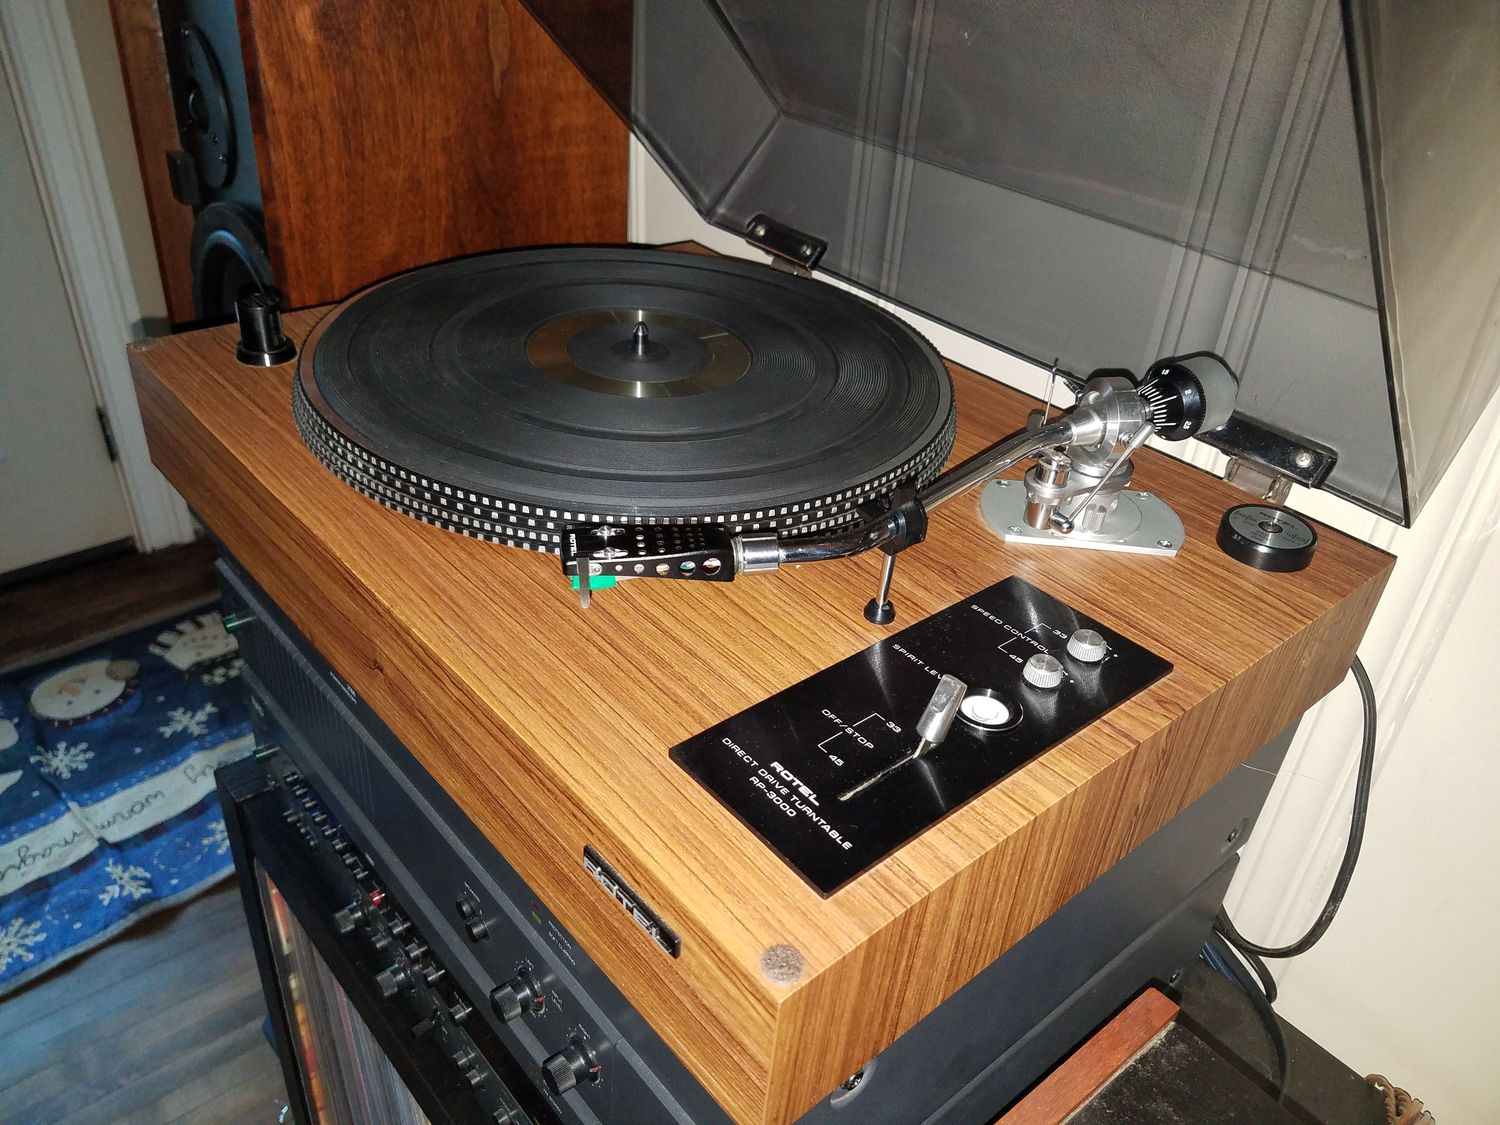 How Do You Adjust The Tonearm On Rotel Rp 3000 Direct Drive Turntable